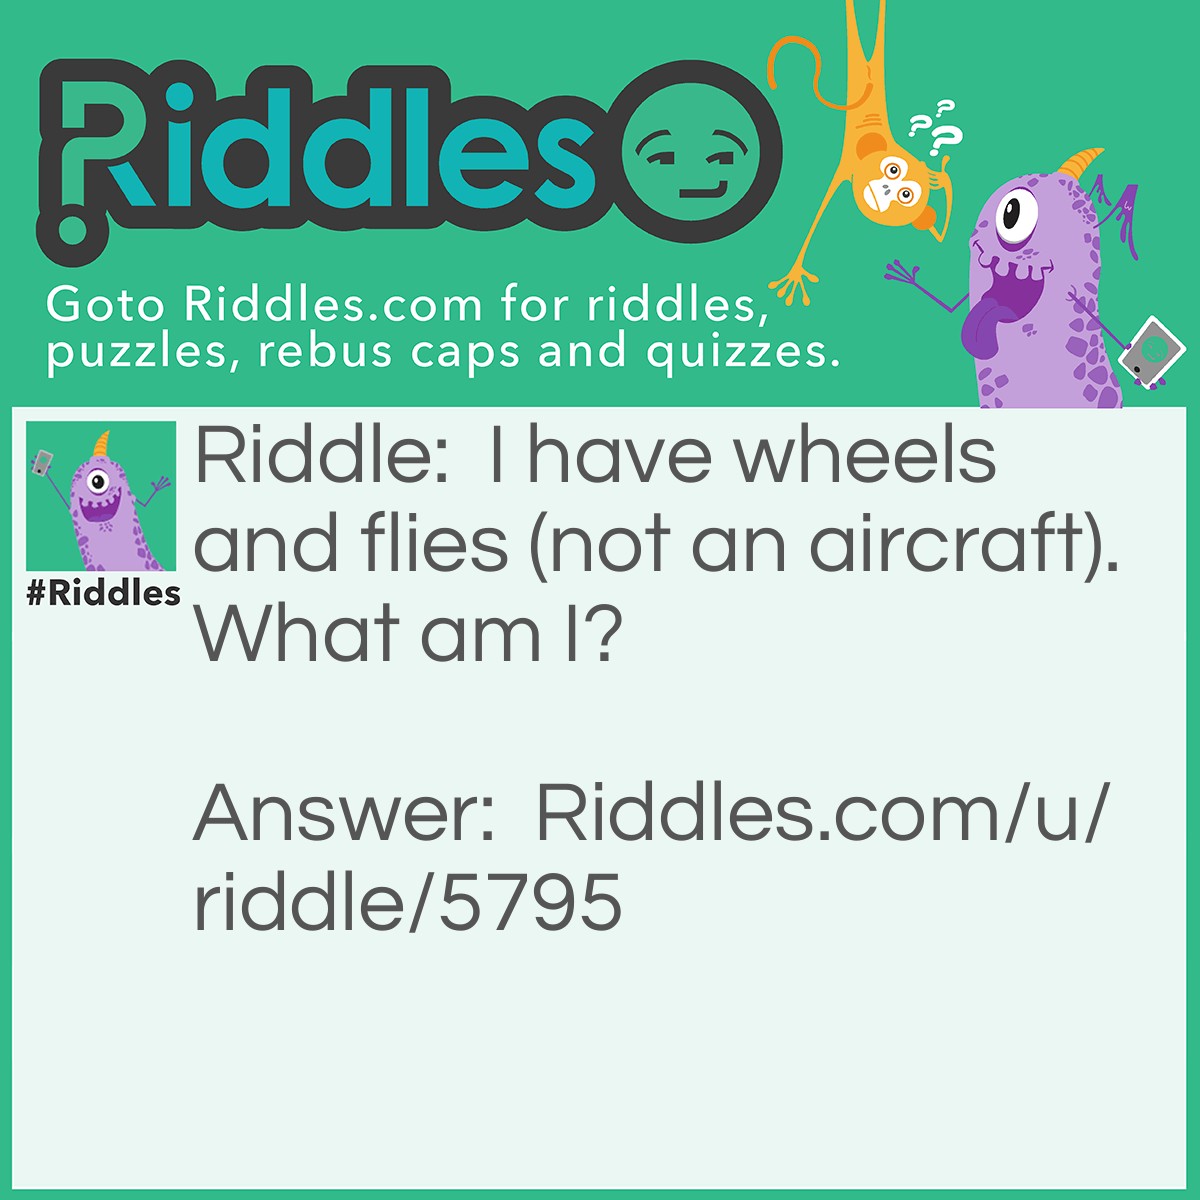 Riddle: I have wheels and flies (not an aircraft). What am I? Answer: A garbage truck